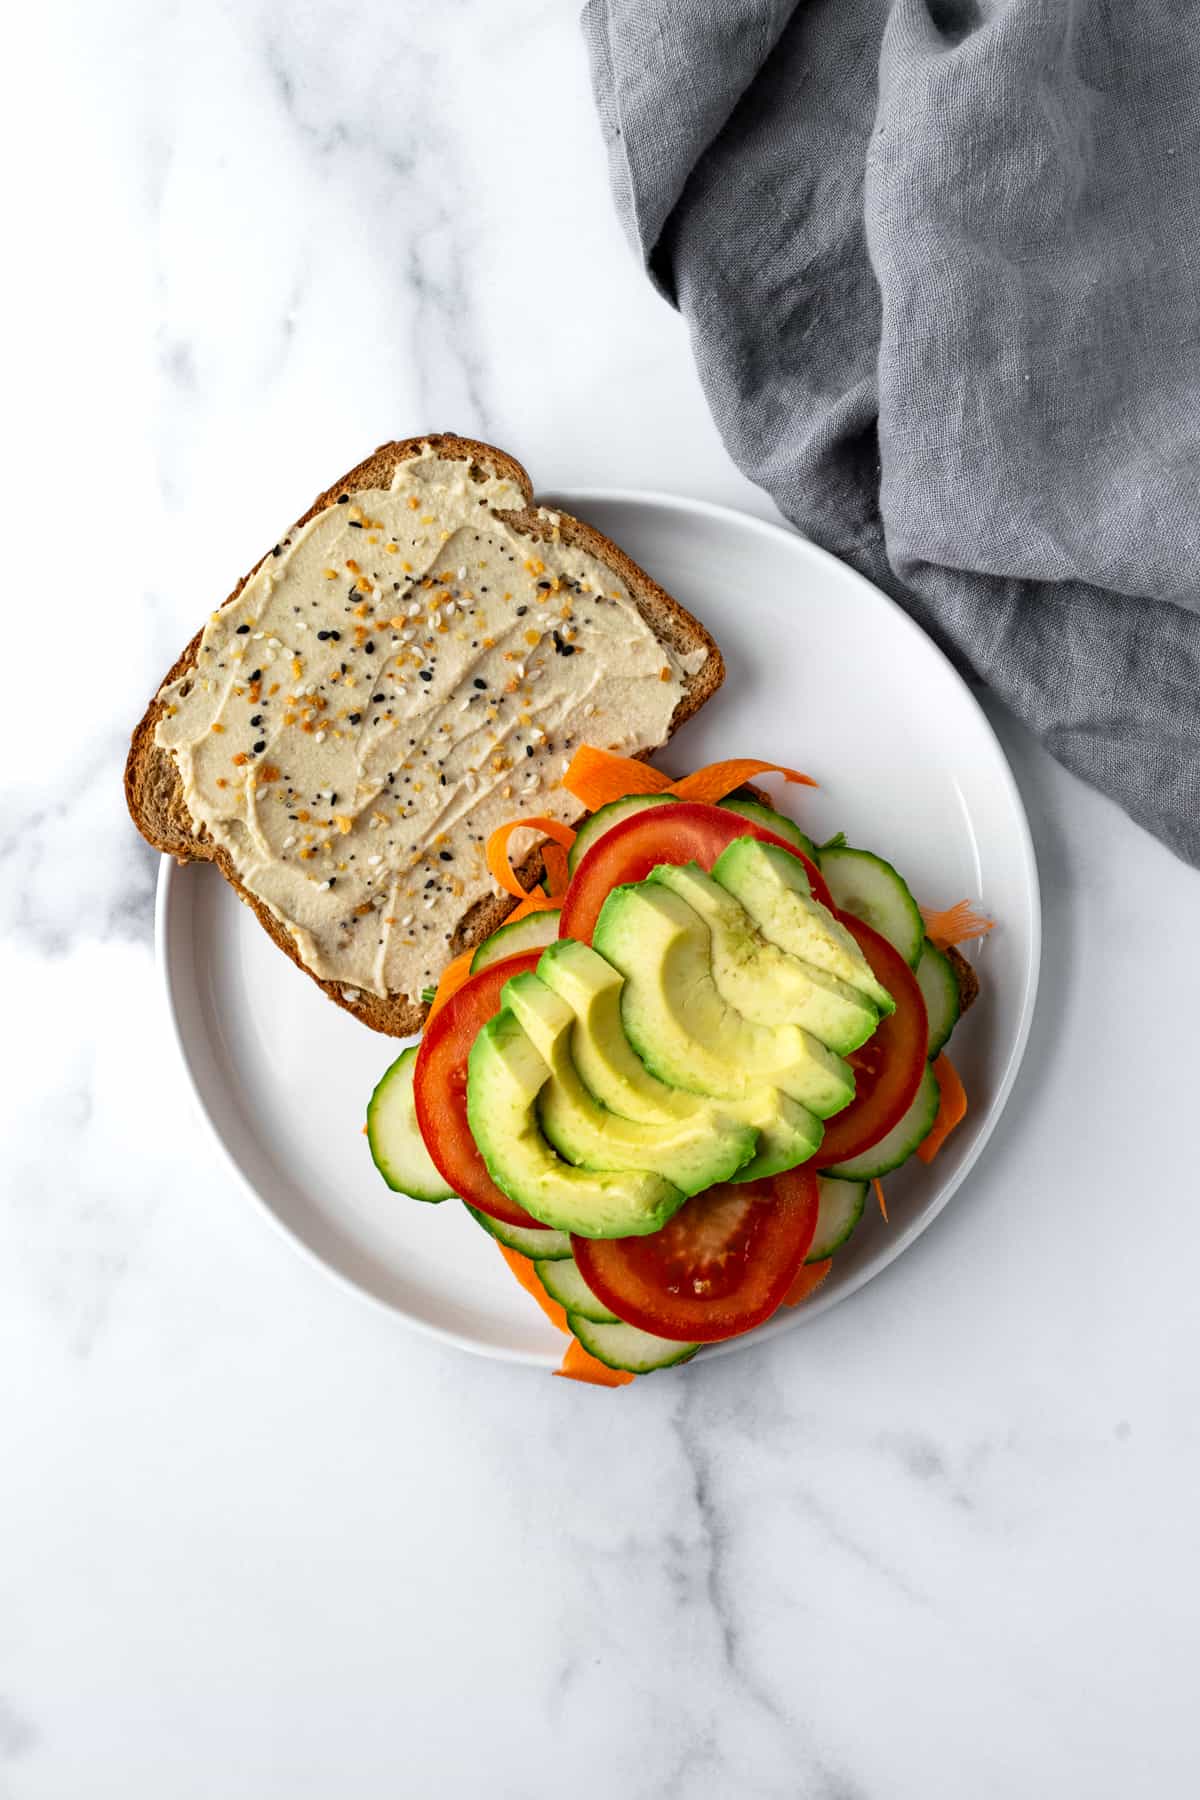 Open faced Cucumber Hummus Sandwich topped with carrots, tomato, and avocado on a white plate.